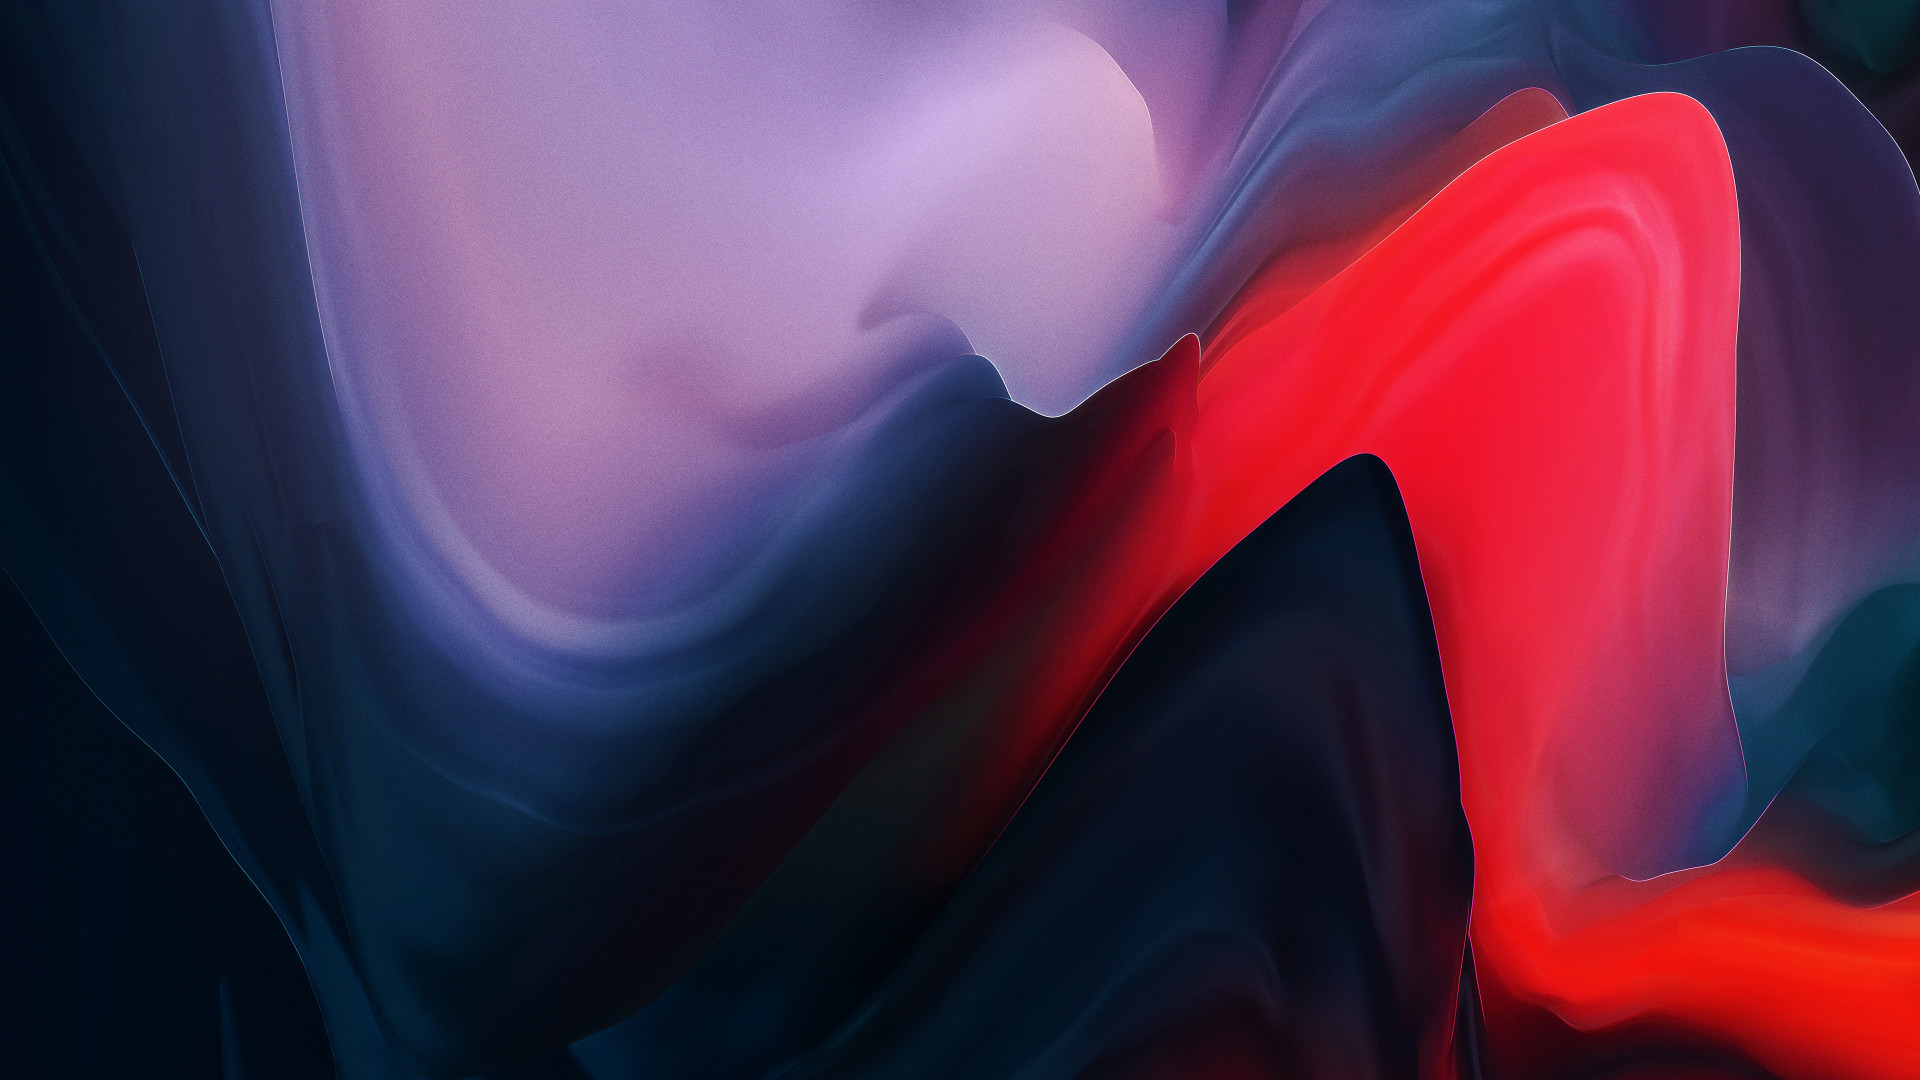 The Abstract from OnePlus 6T wallpaper 1920x1080